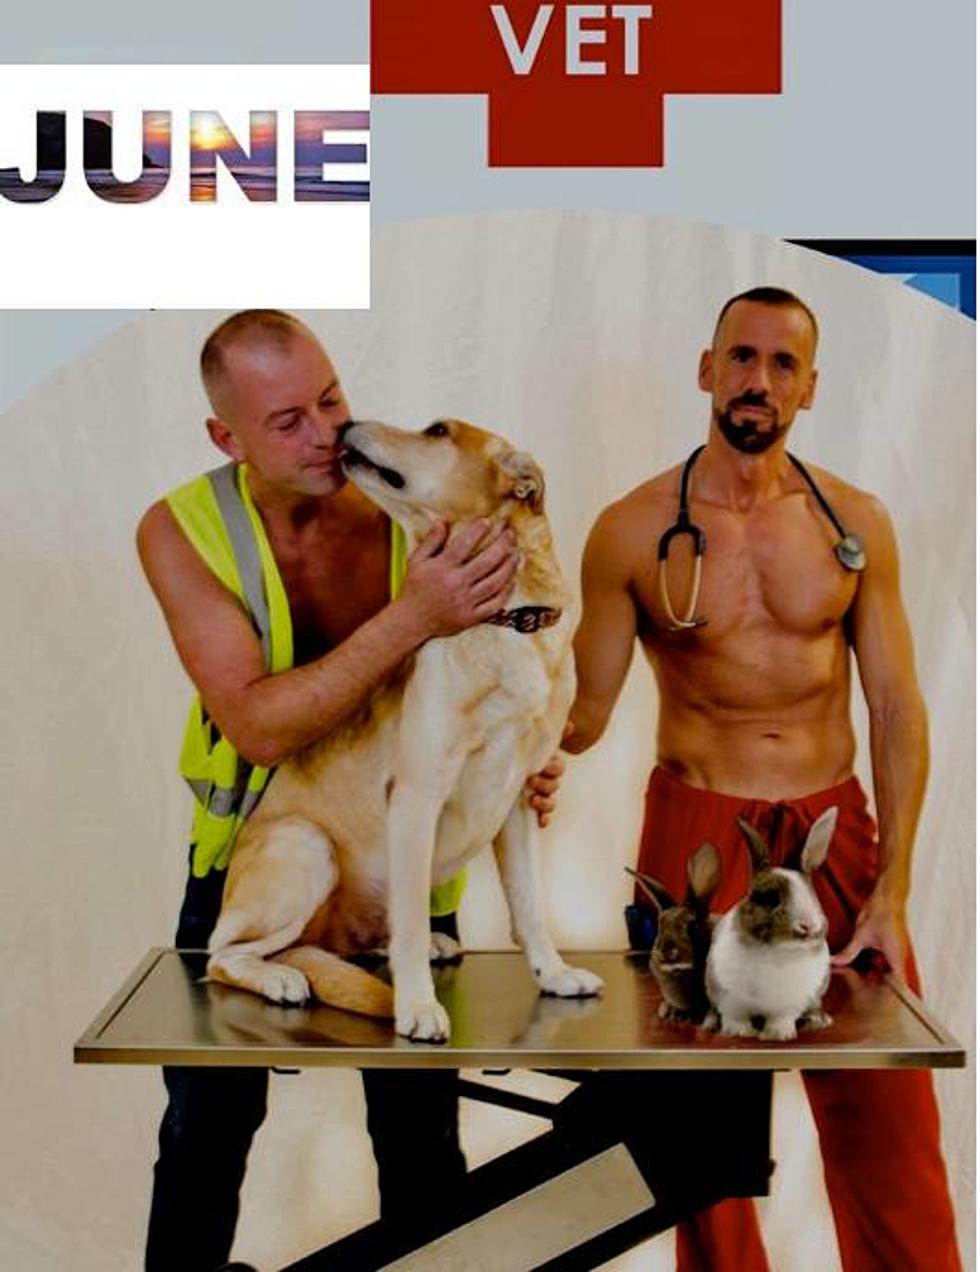 2017 Calendar Features Hunky Local Businessmen with Shelter Animals